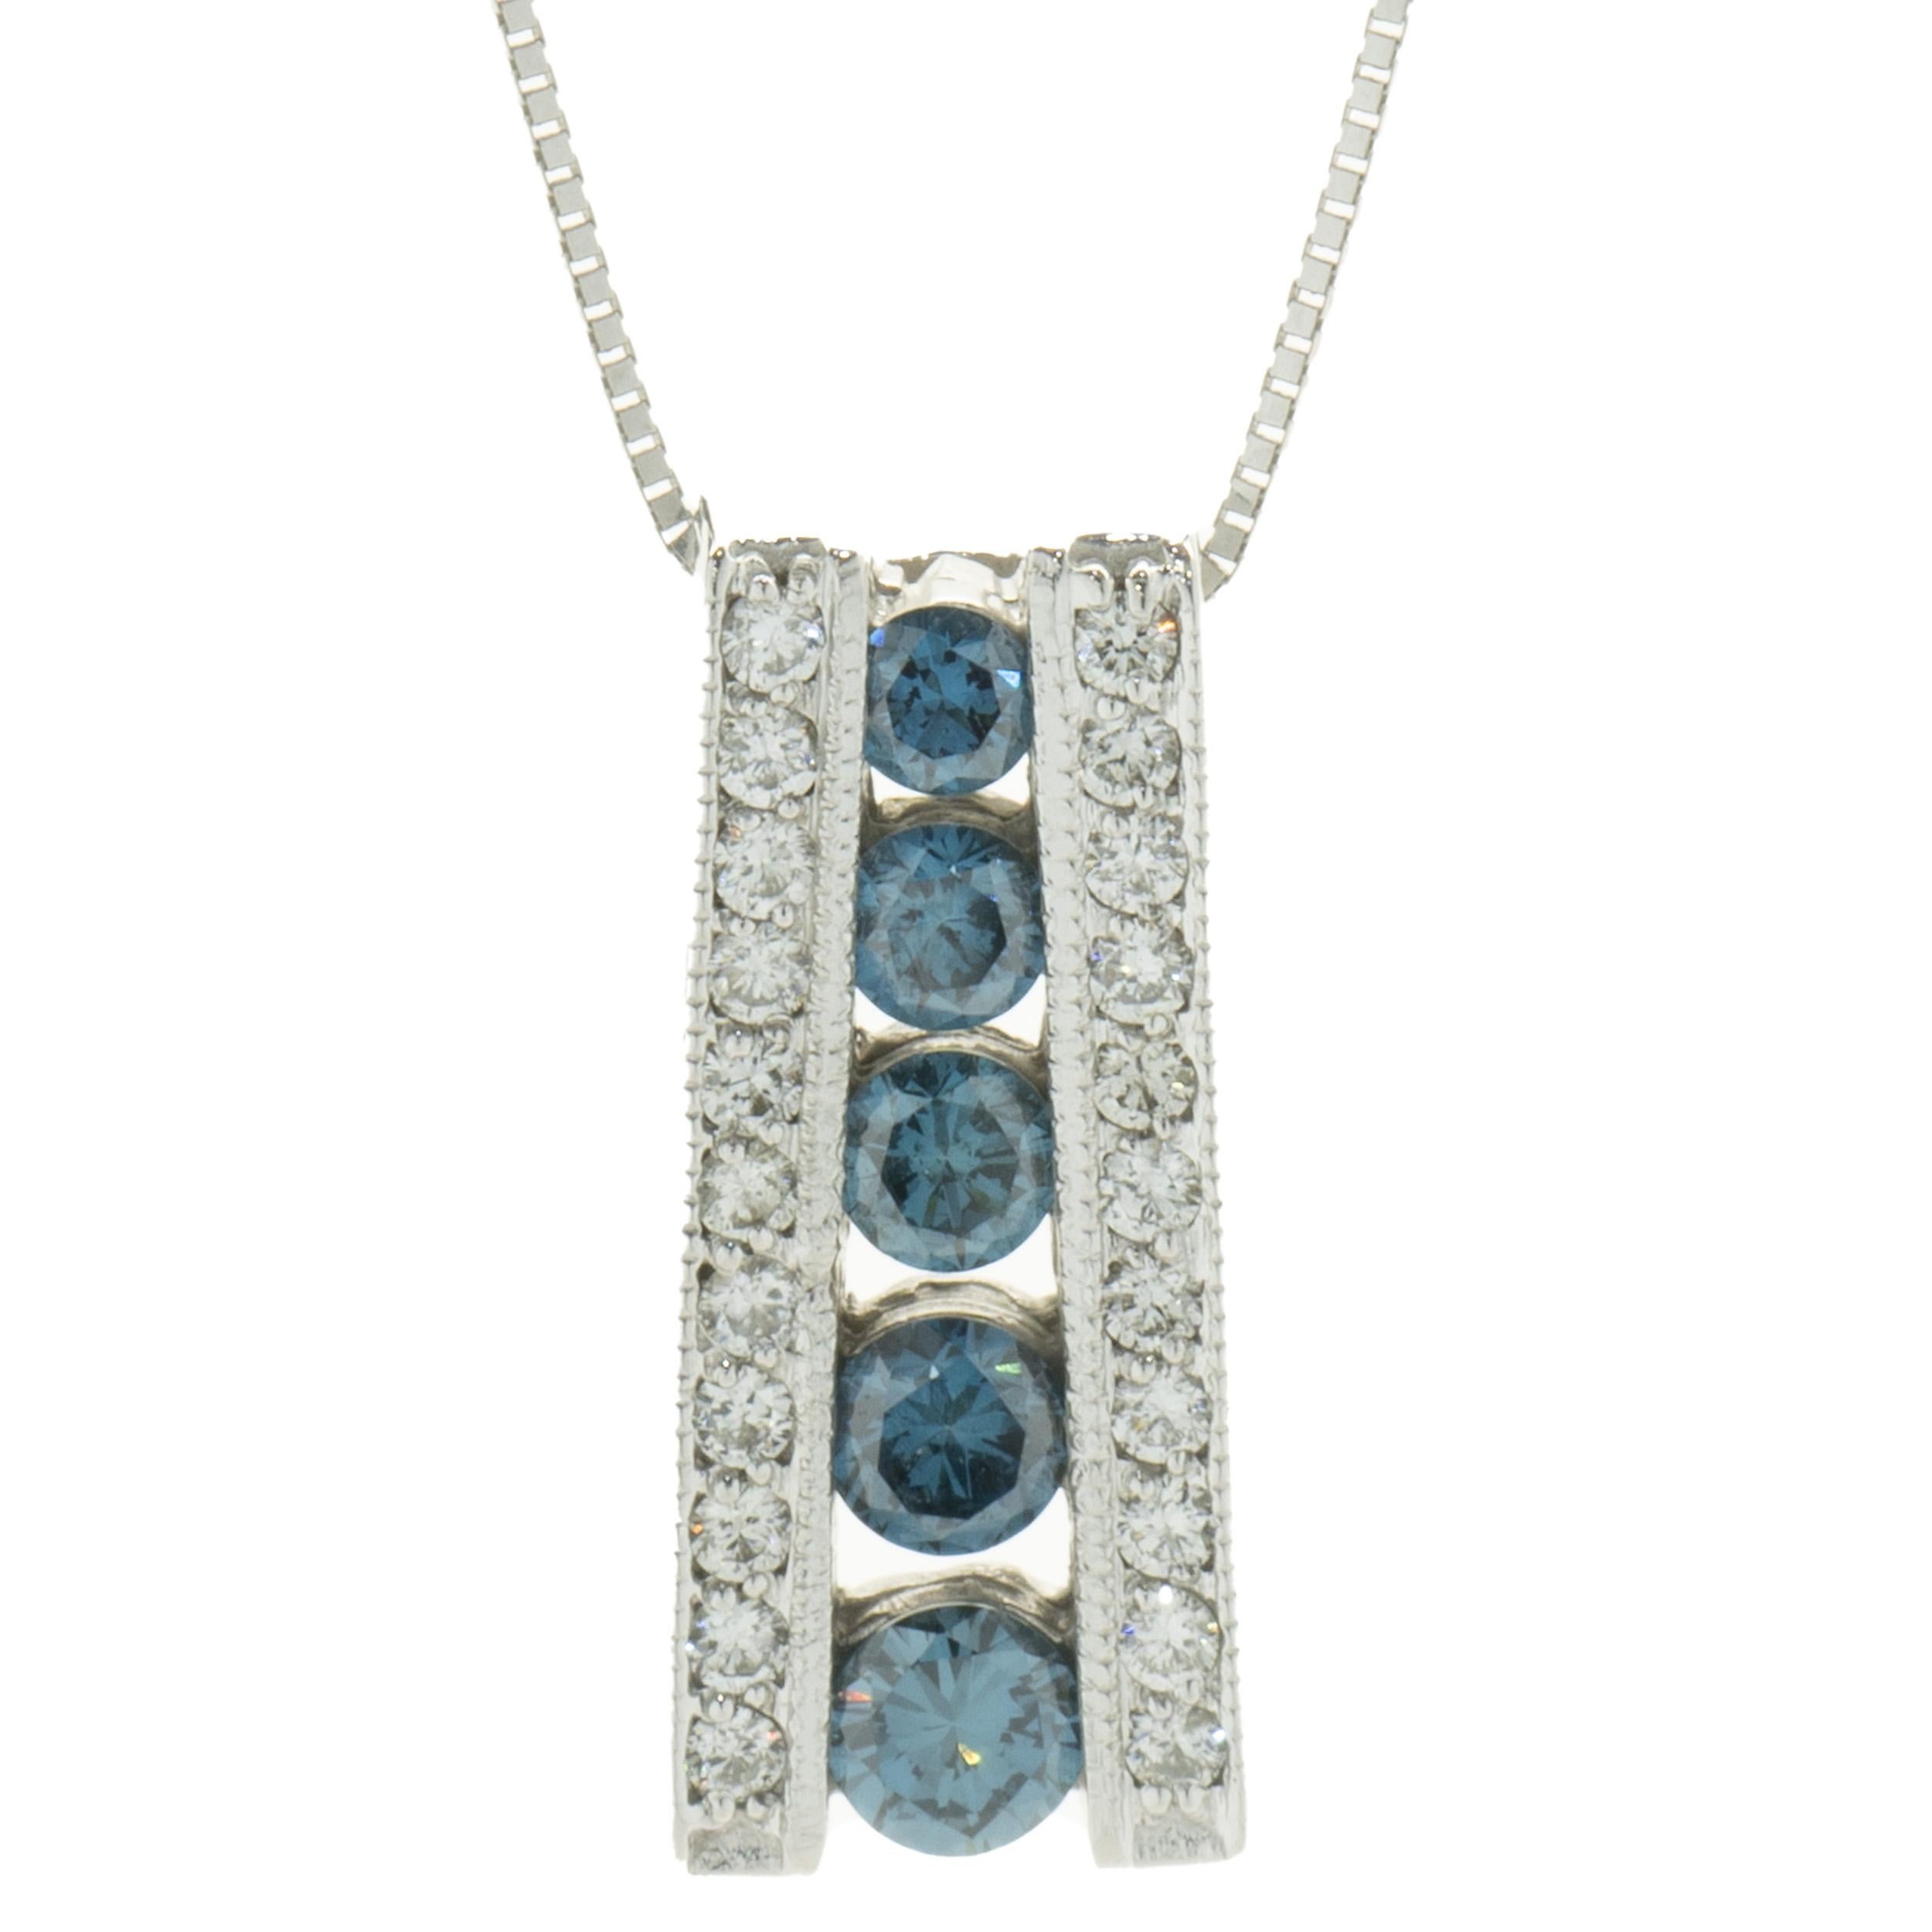 Designer: custom
Material: 18K white gold
Diamond: 5 round brilliant cut = 0.40cttw
Color: Blue
Clarity: SI1
Diamond: 22 round brilliant cut = 0.22cttw
Color: H
Clarity: SI1
Dimensions: necklace measures 18-inches in length
Weight: 5.83 grams